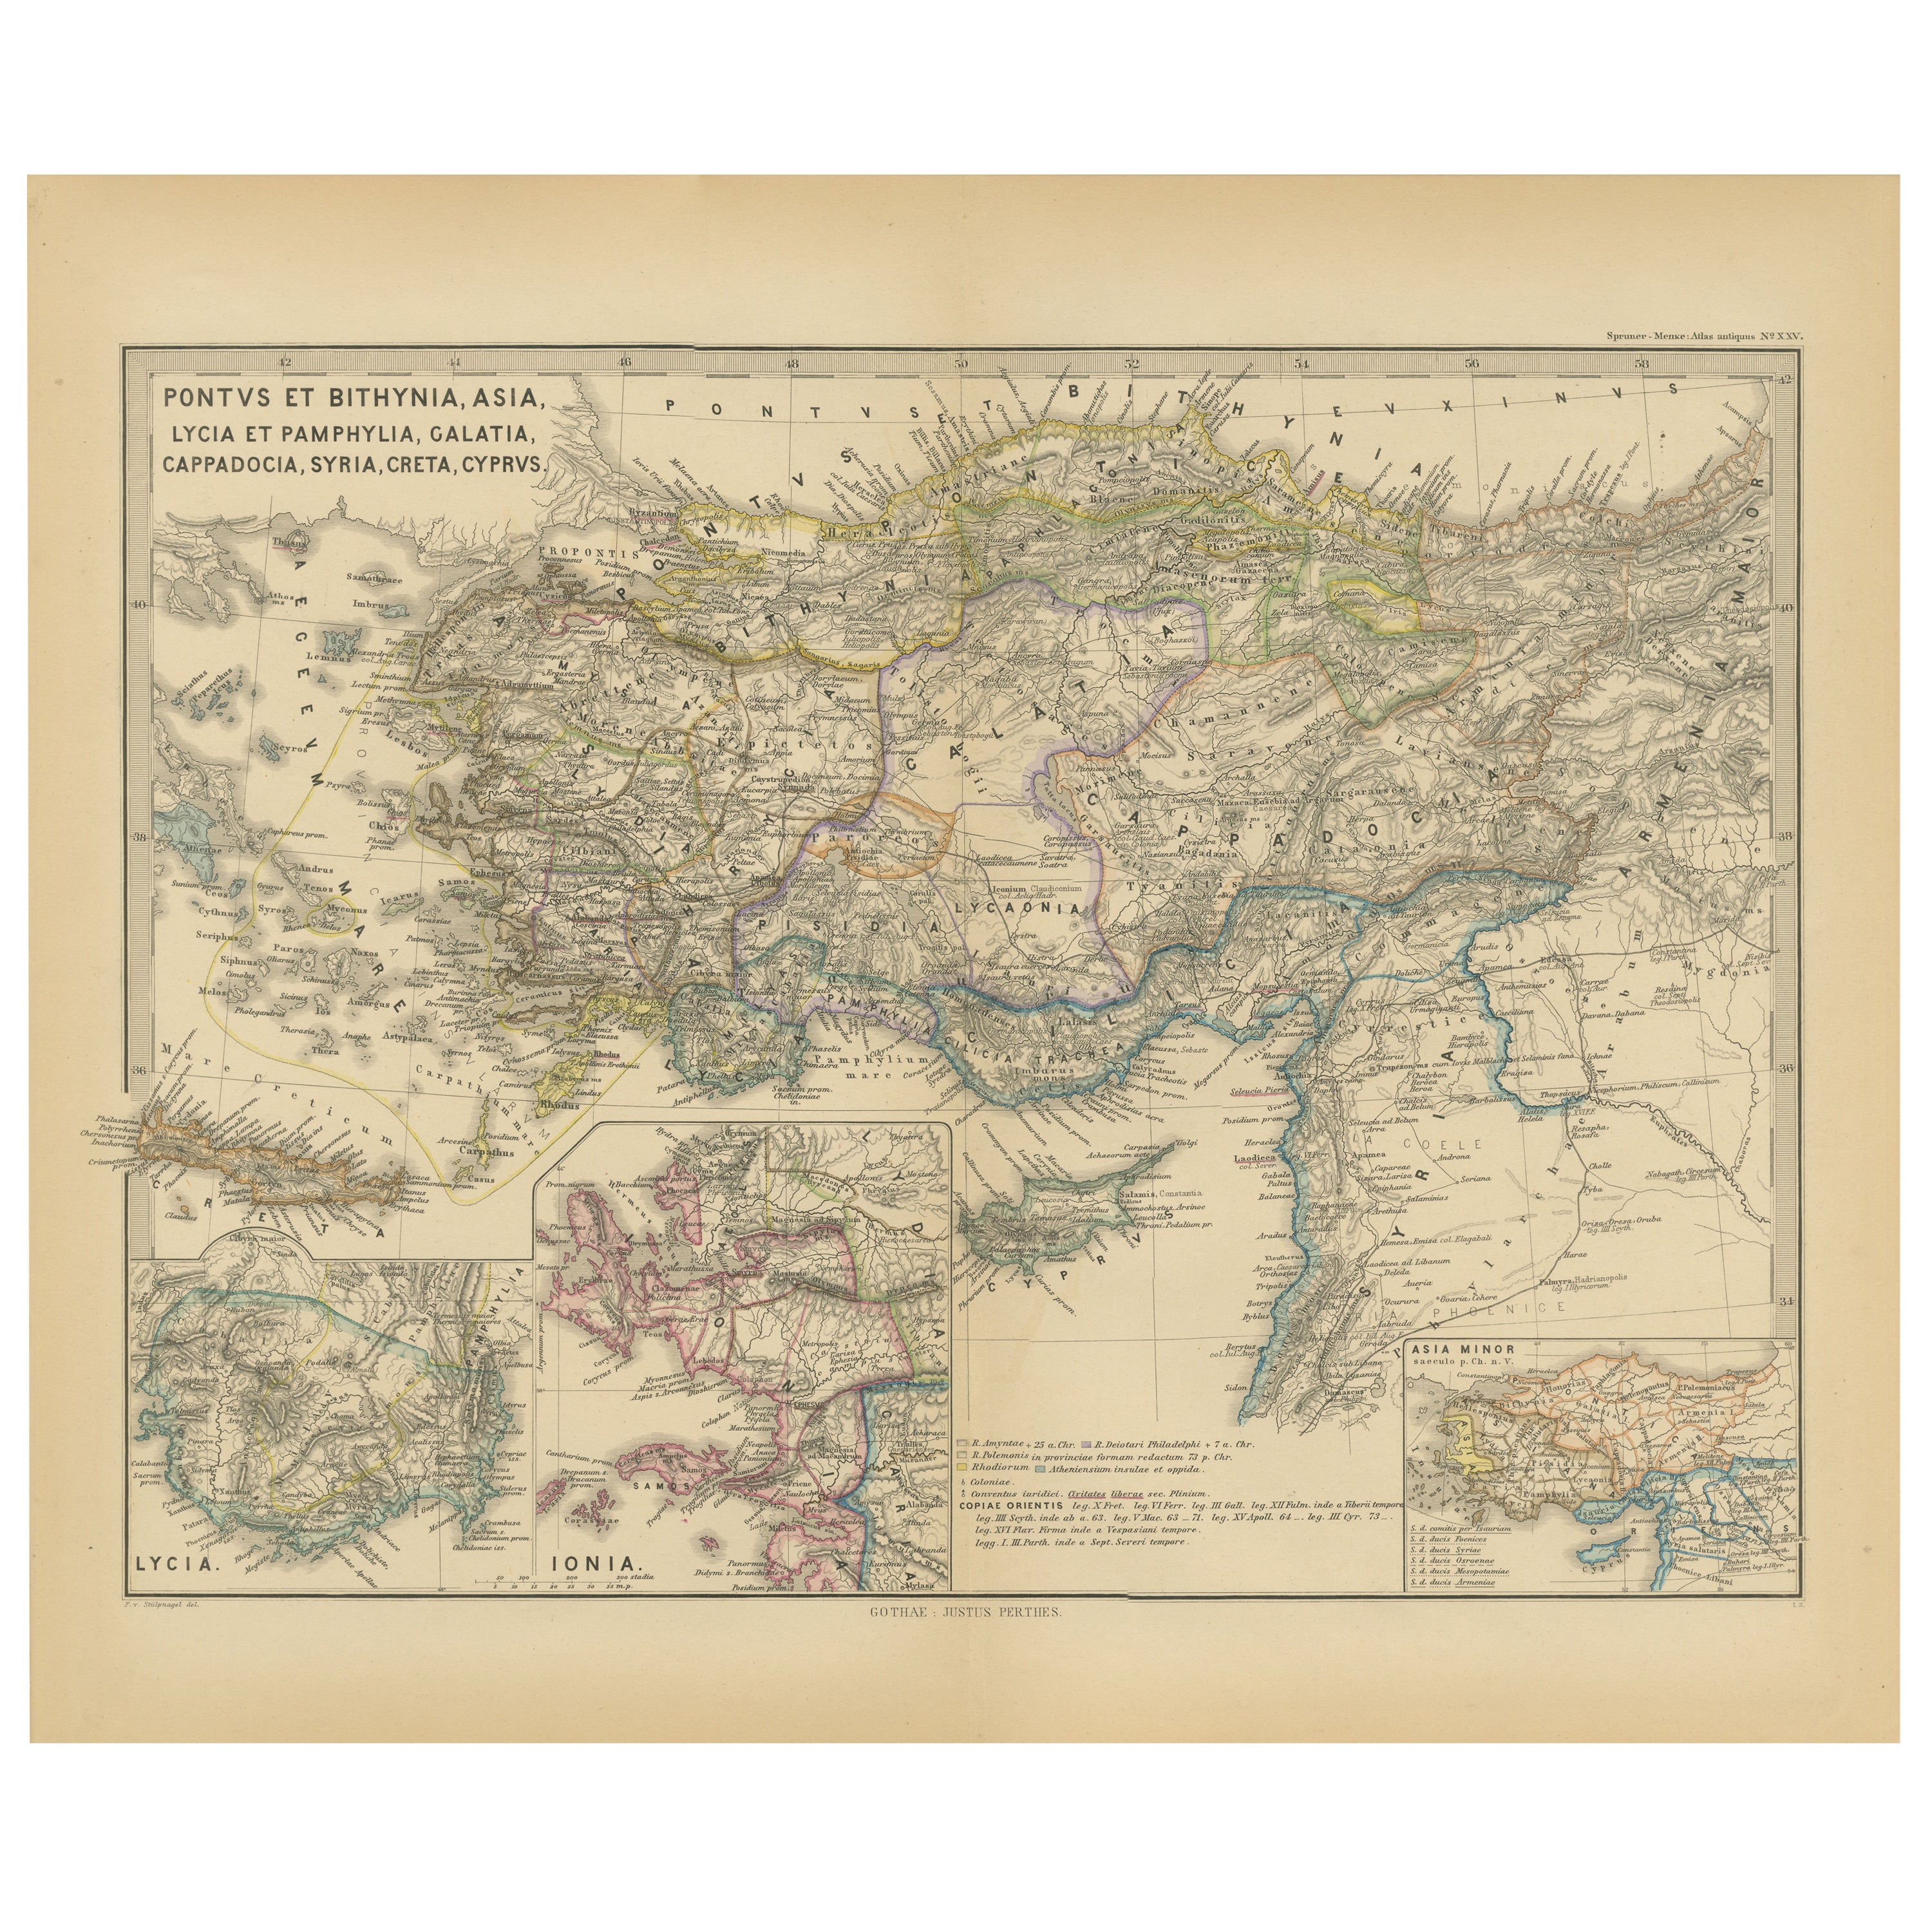 Asia Minor and Provinces: A Roman Empire Map from Spruner-Menke Atlas, 1880